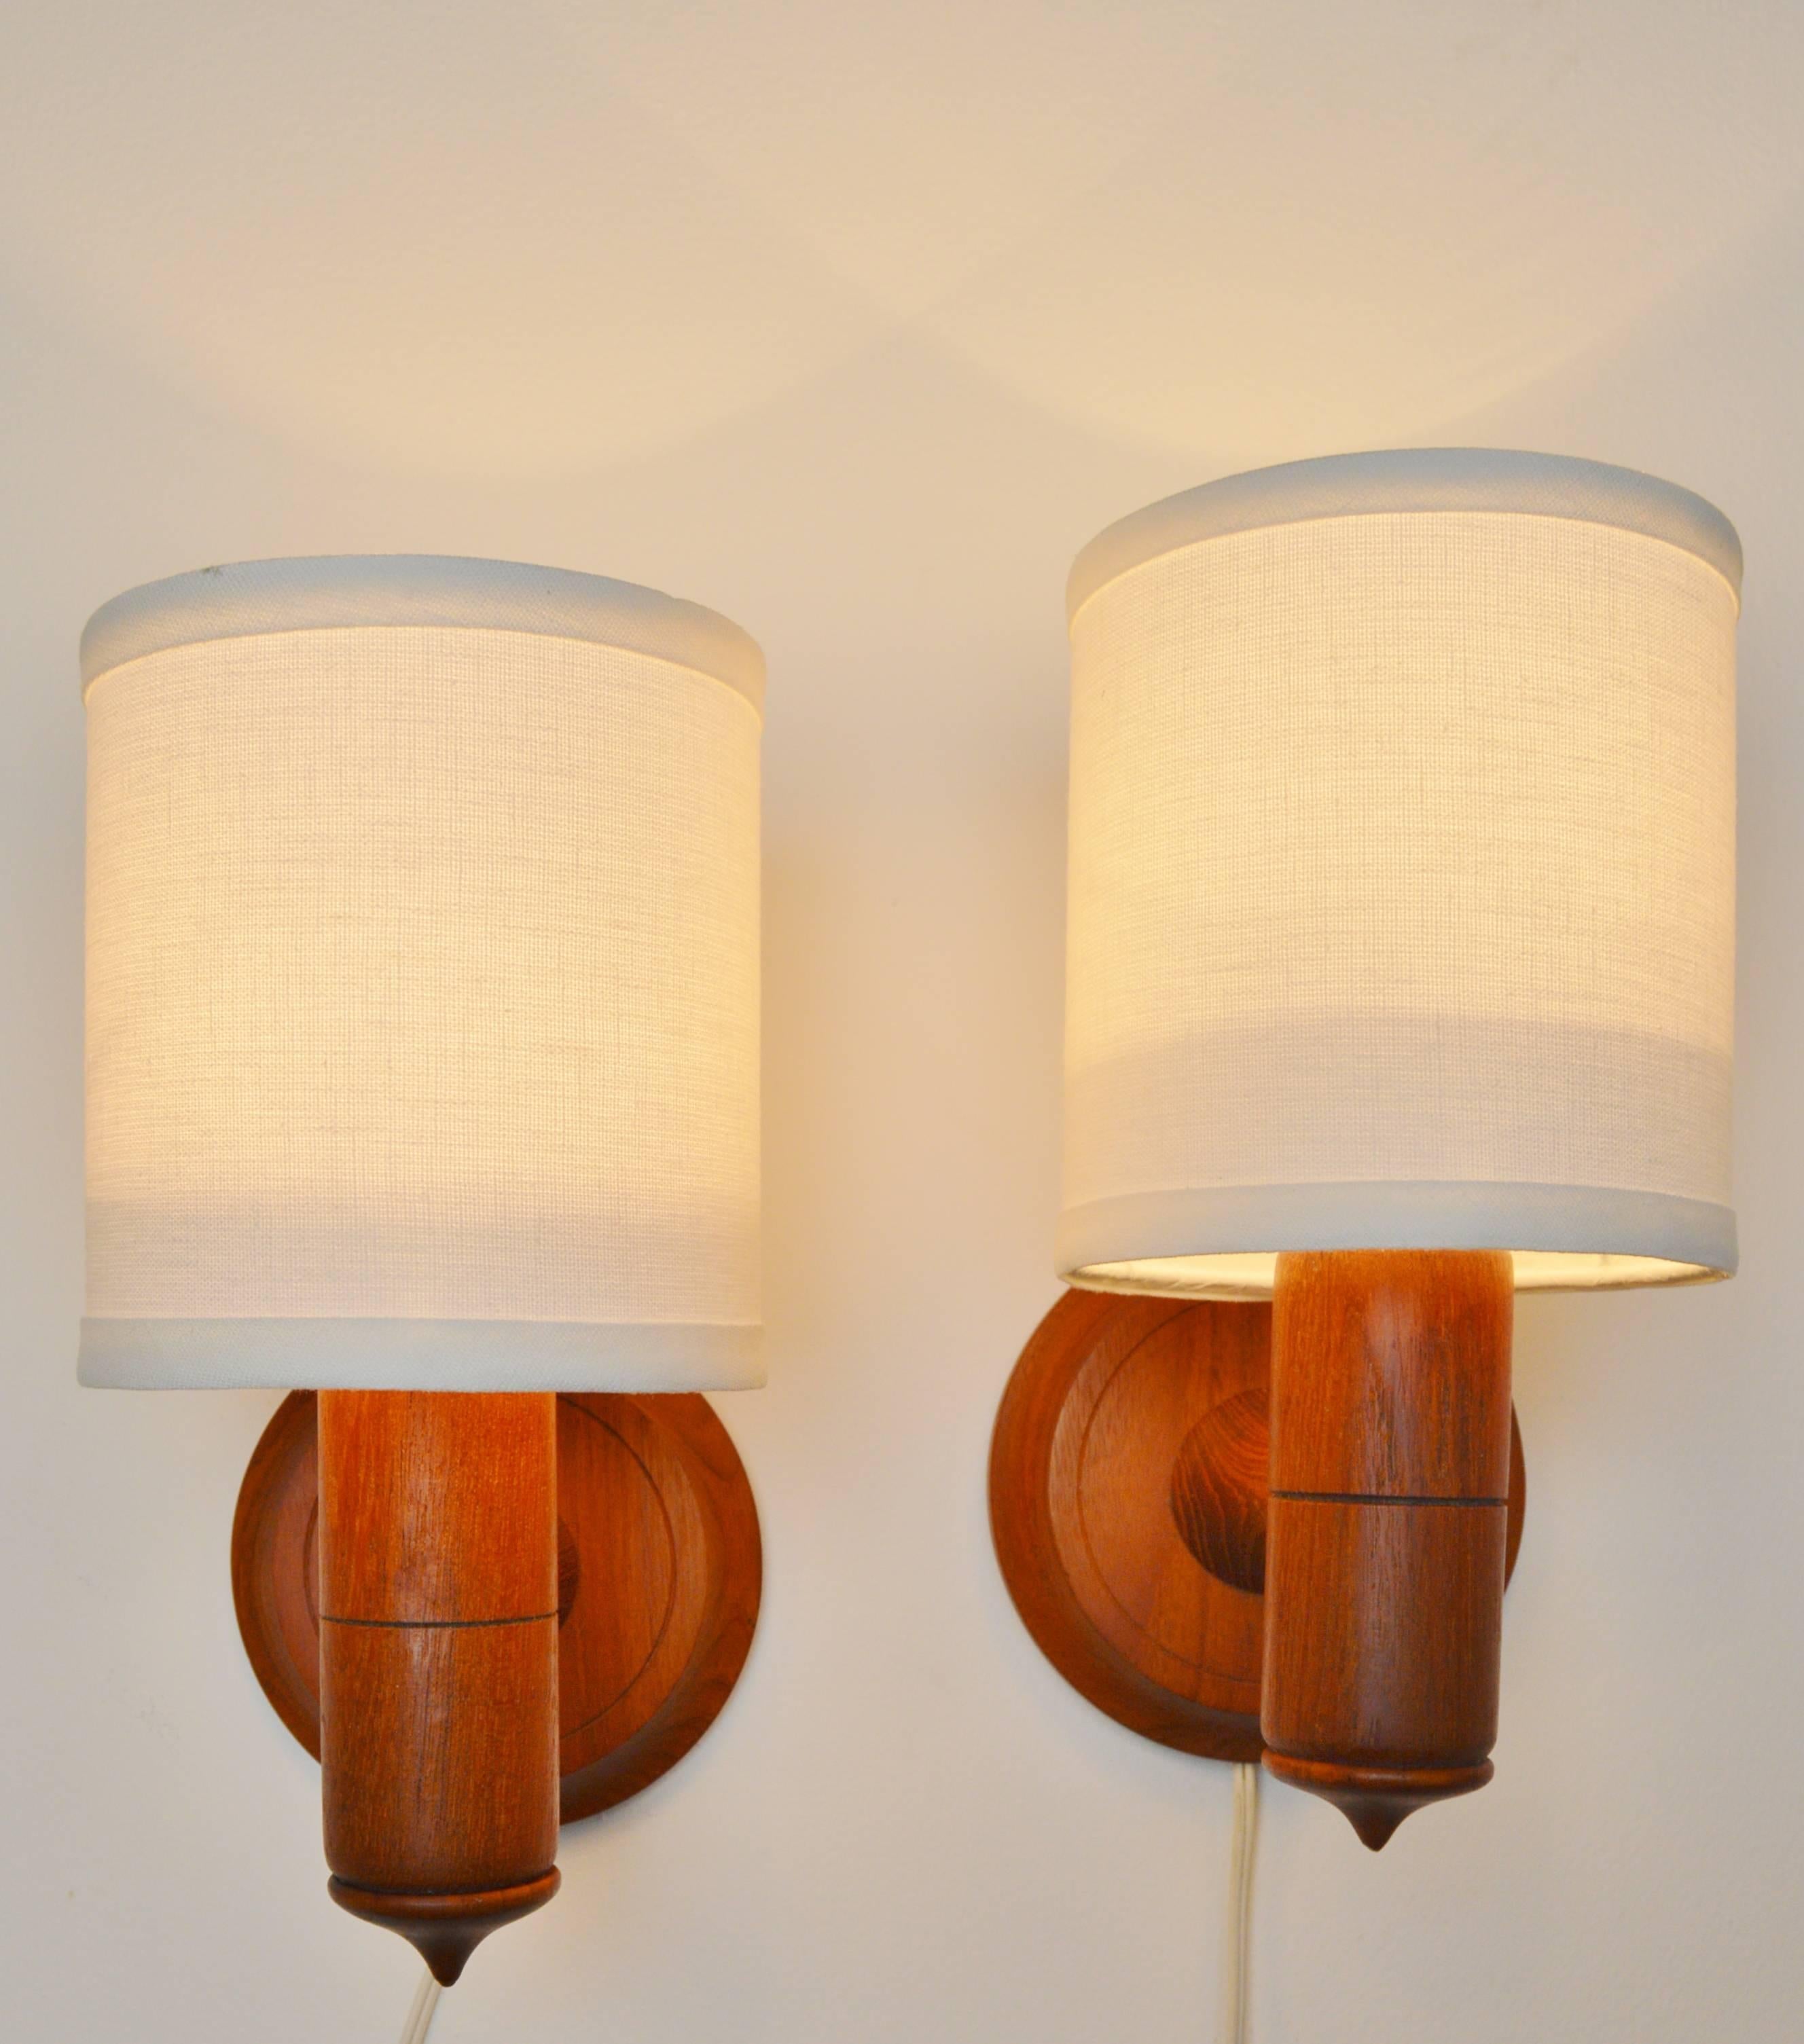 This fabulous pair of Danish Modern teak sculptural wall mount sconces are super practical! Attach them to the wall with one screw and plug them in. Ideal as bedside lamps, but you can place them anywhere! Note the subtle sculptural elements